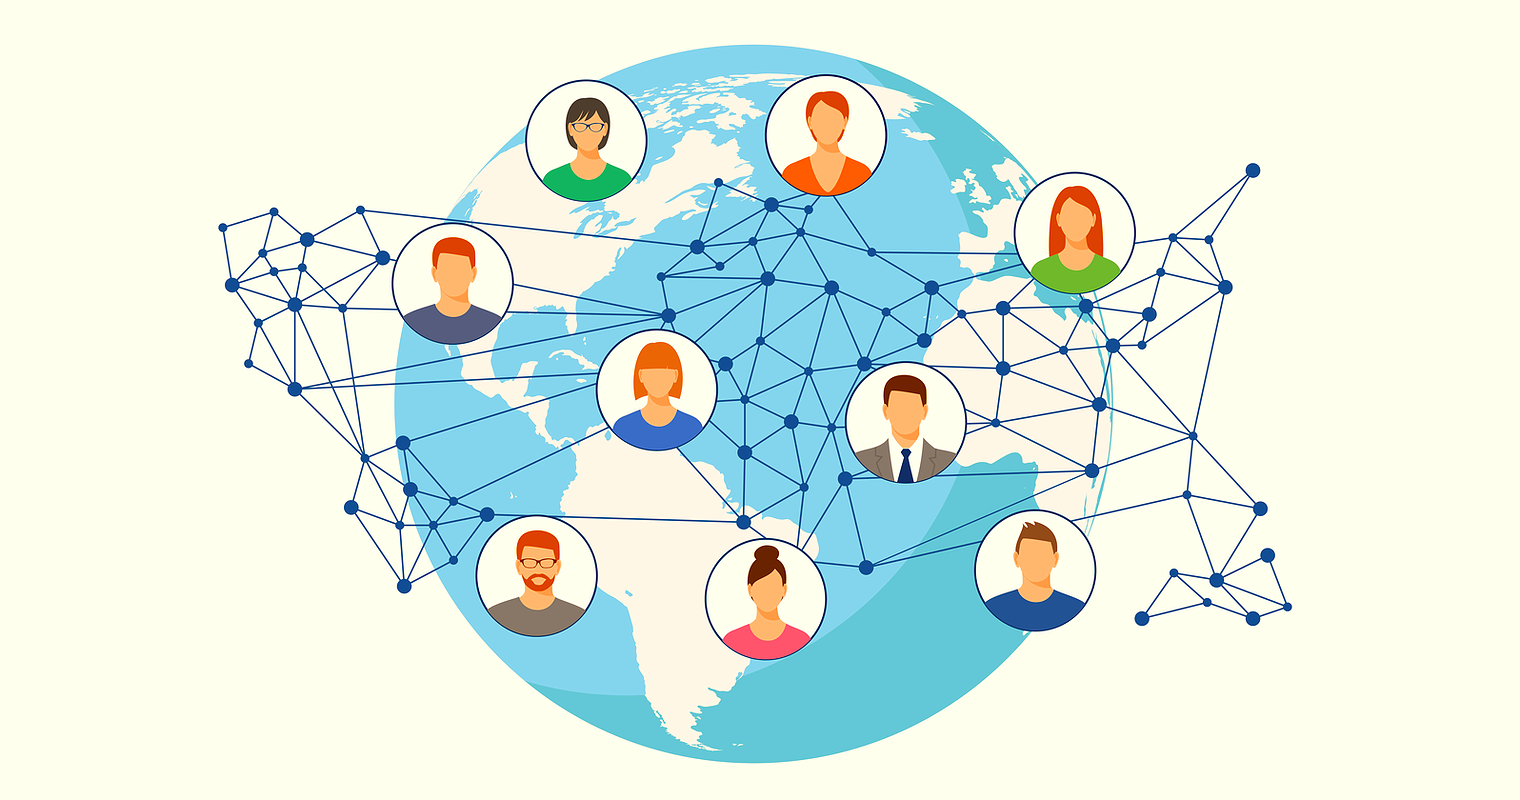 5 Ways to Find New Customers & Grow Your Global Business